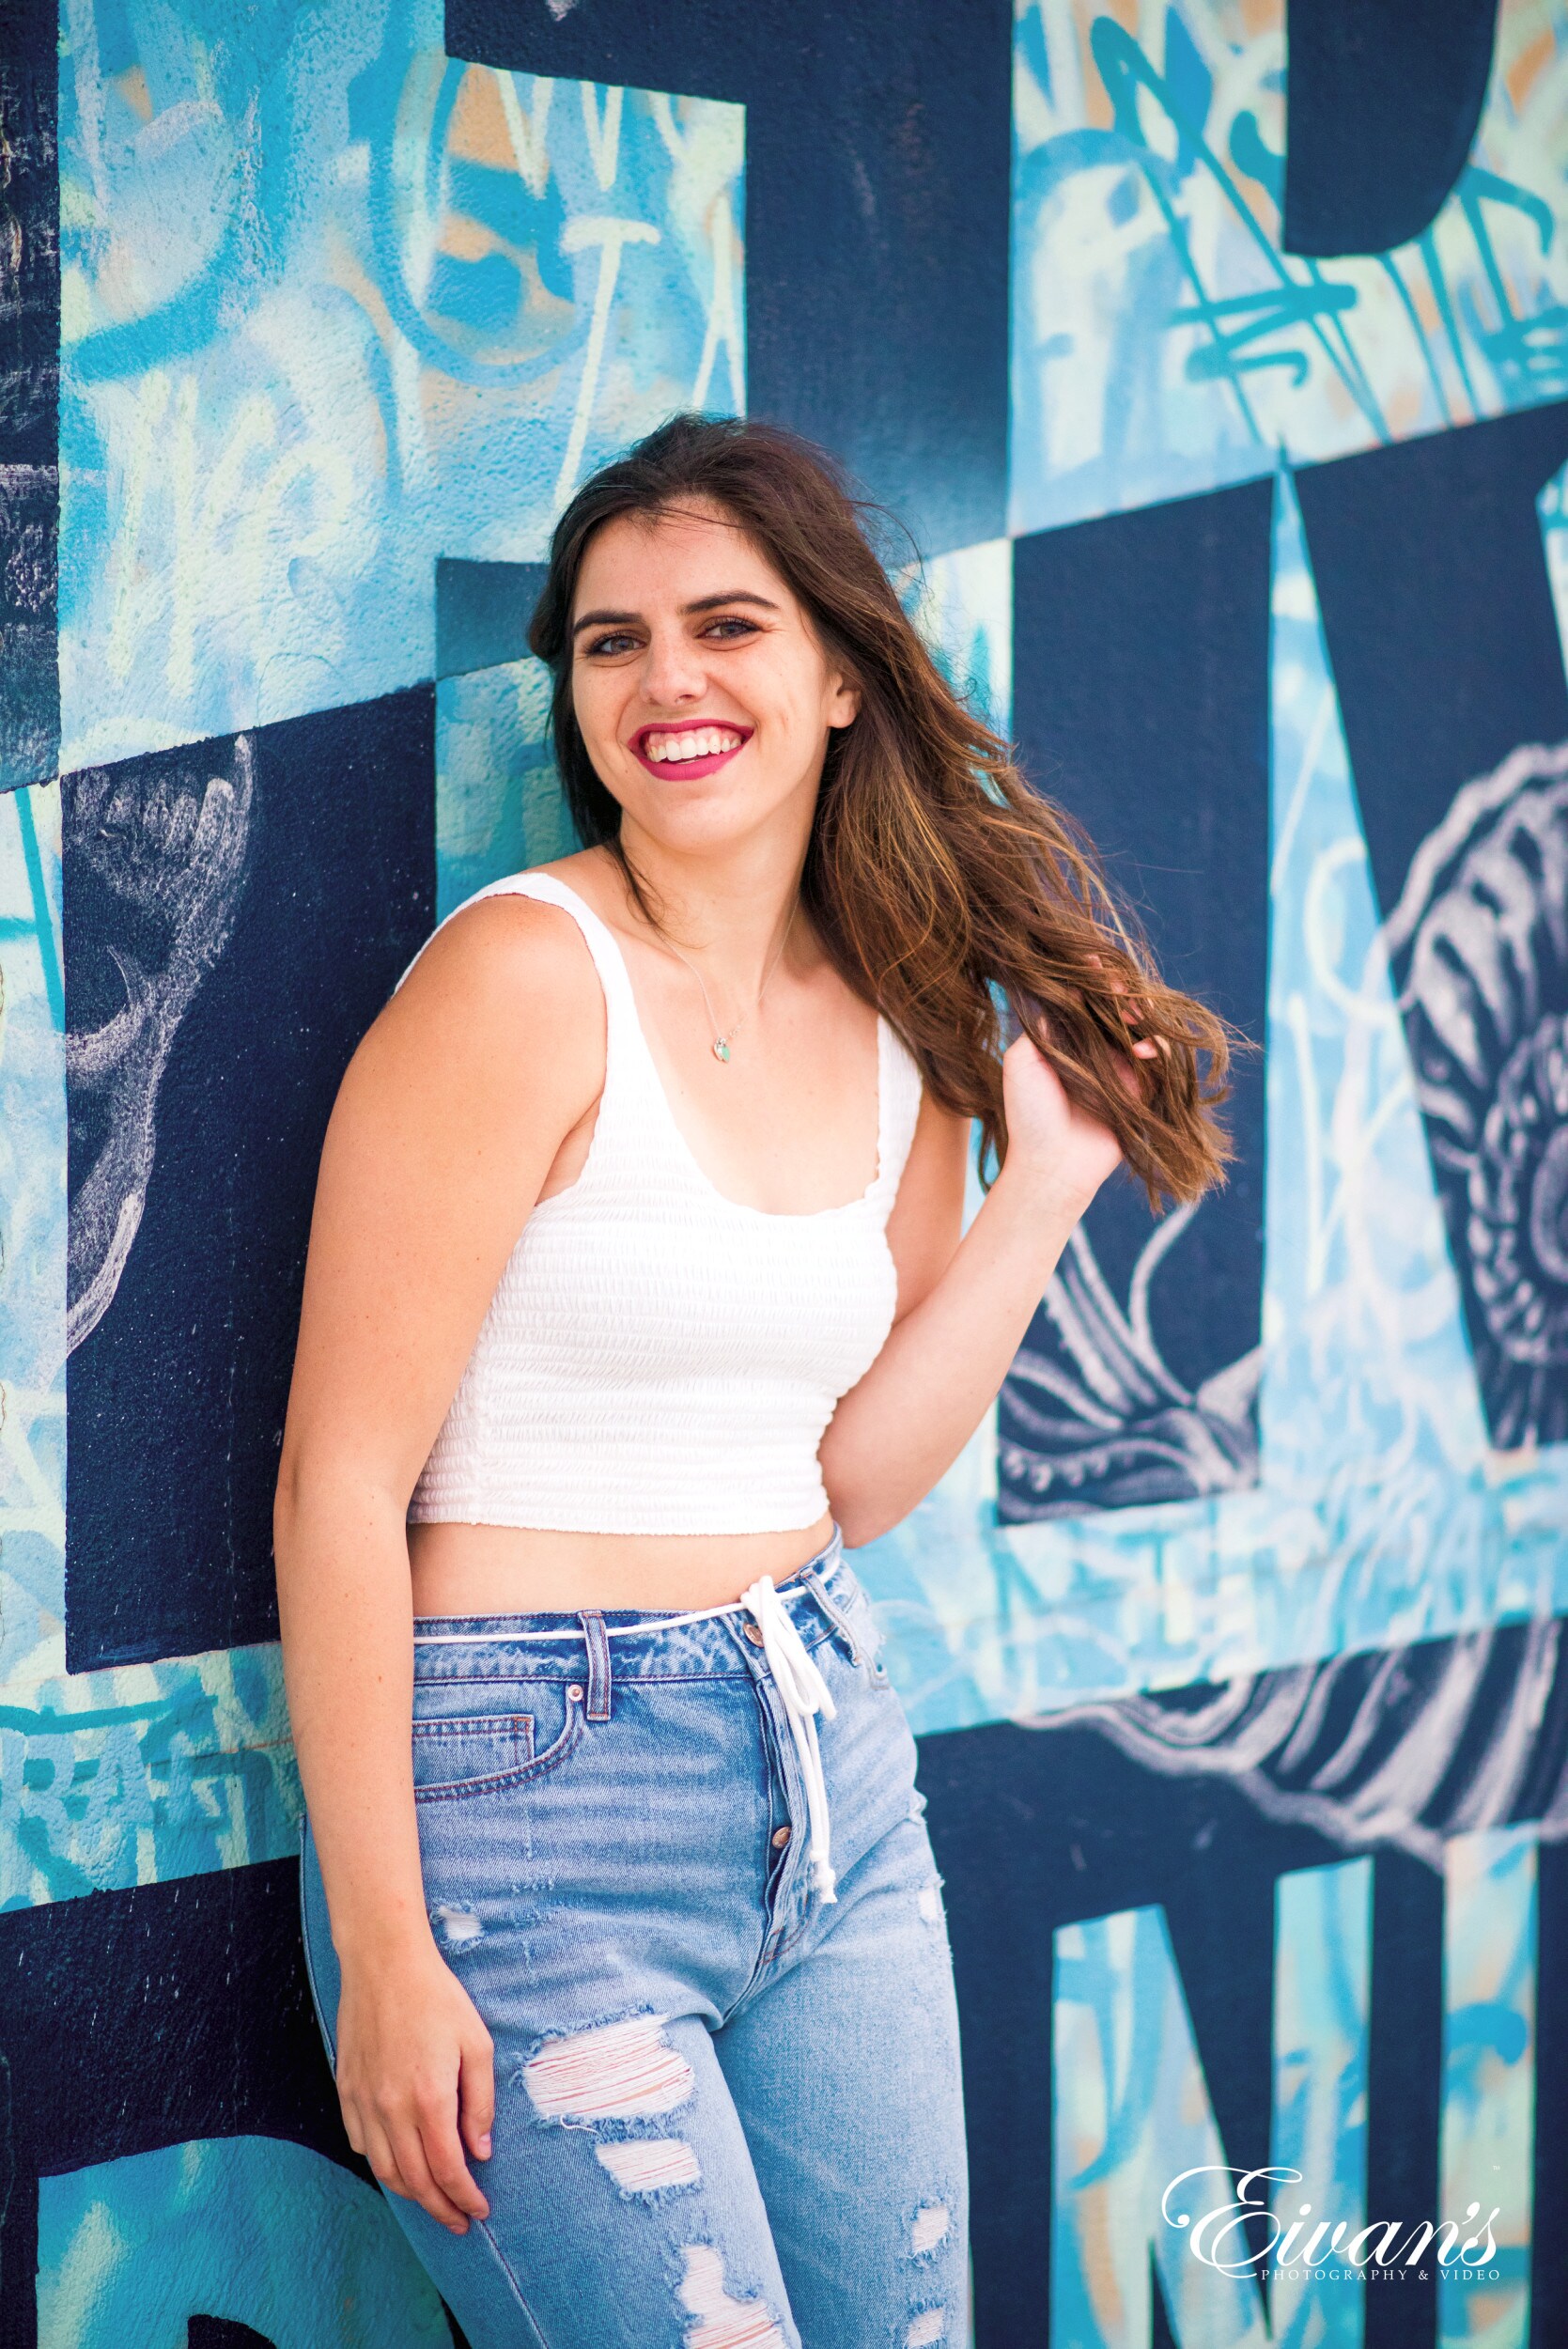 woman in white tank top and blue denim shorts smiling